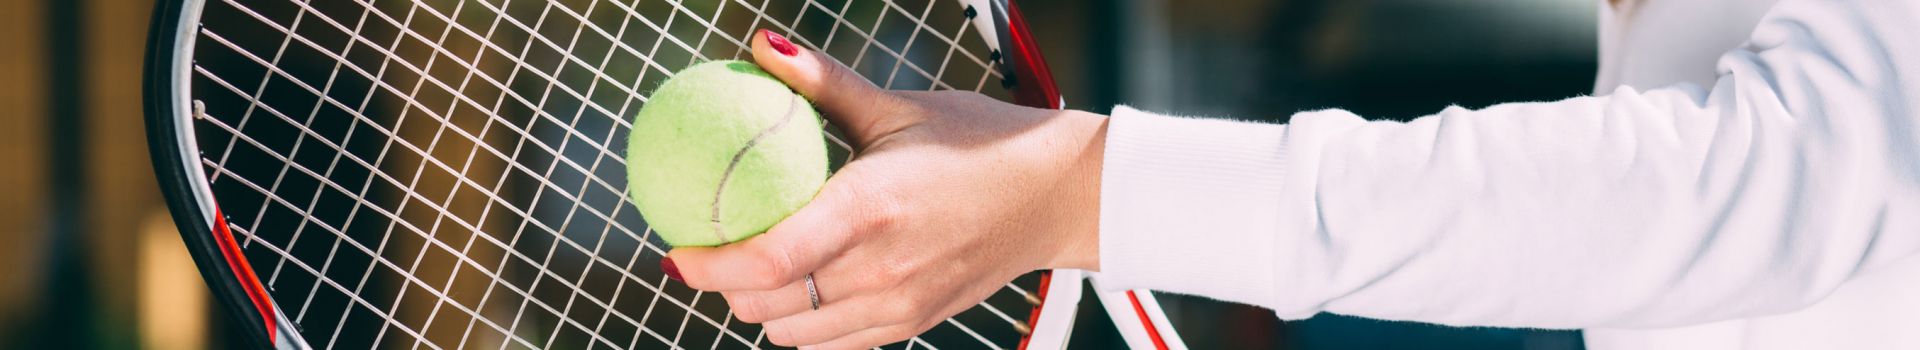 Get Tennis Travel Packages with Cassidy Travel